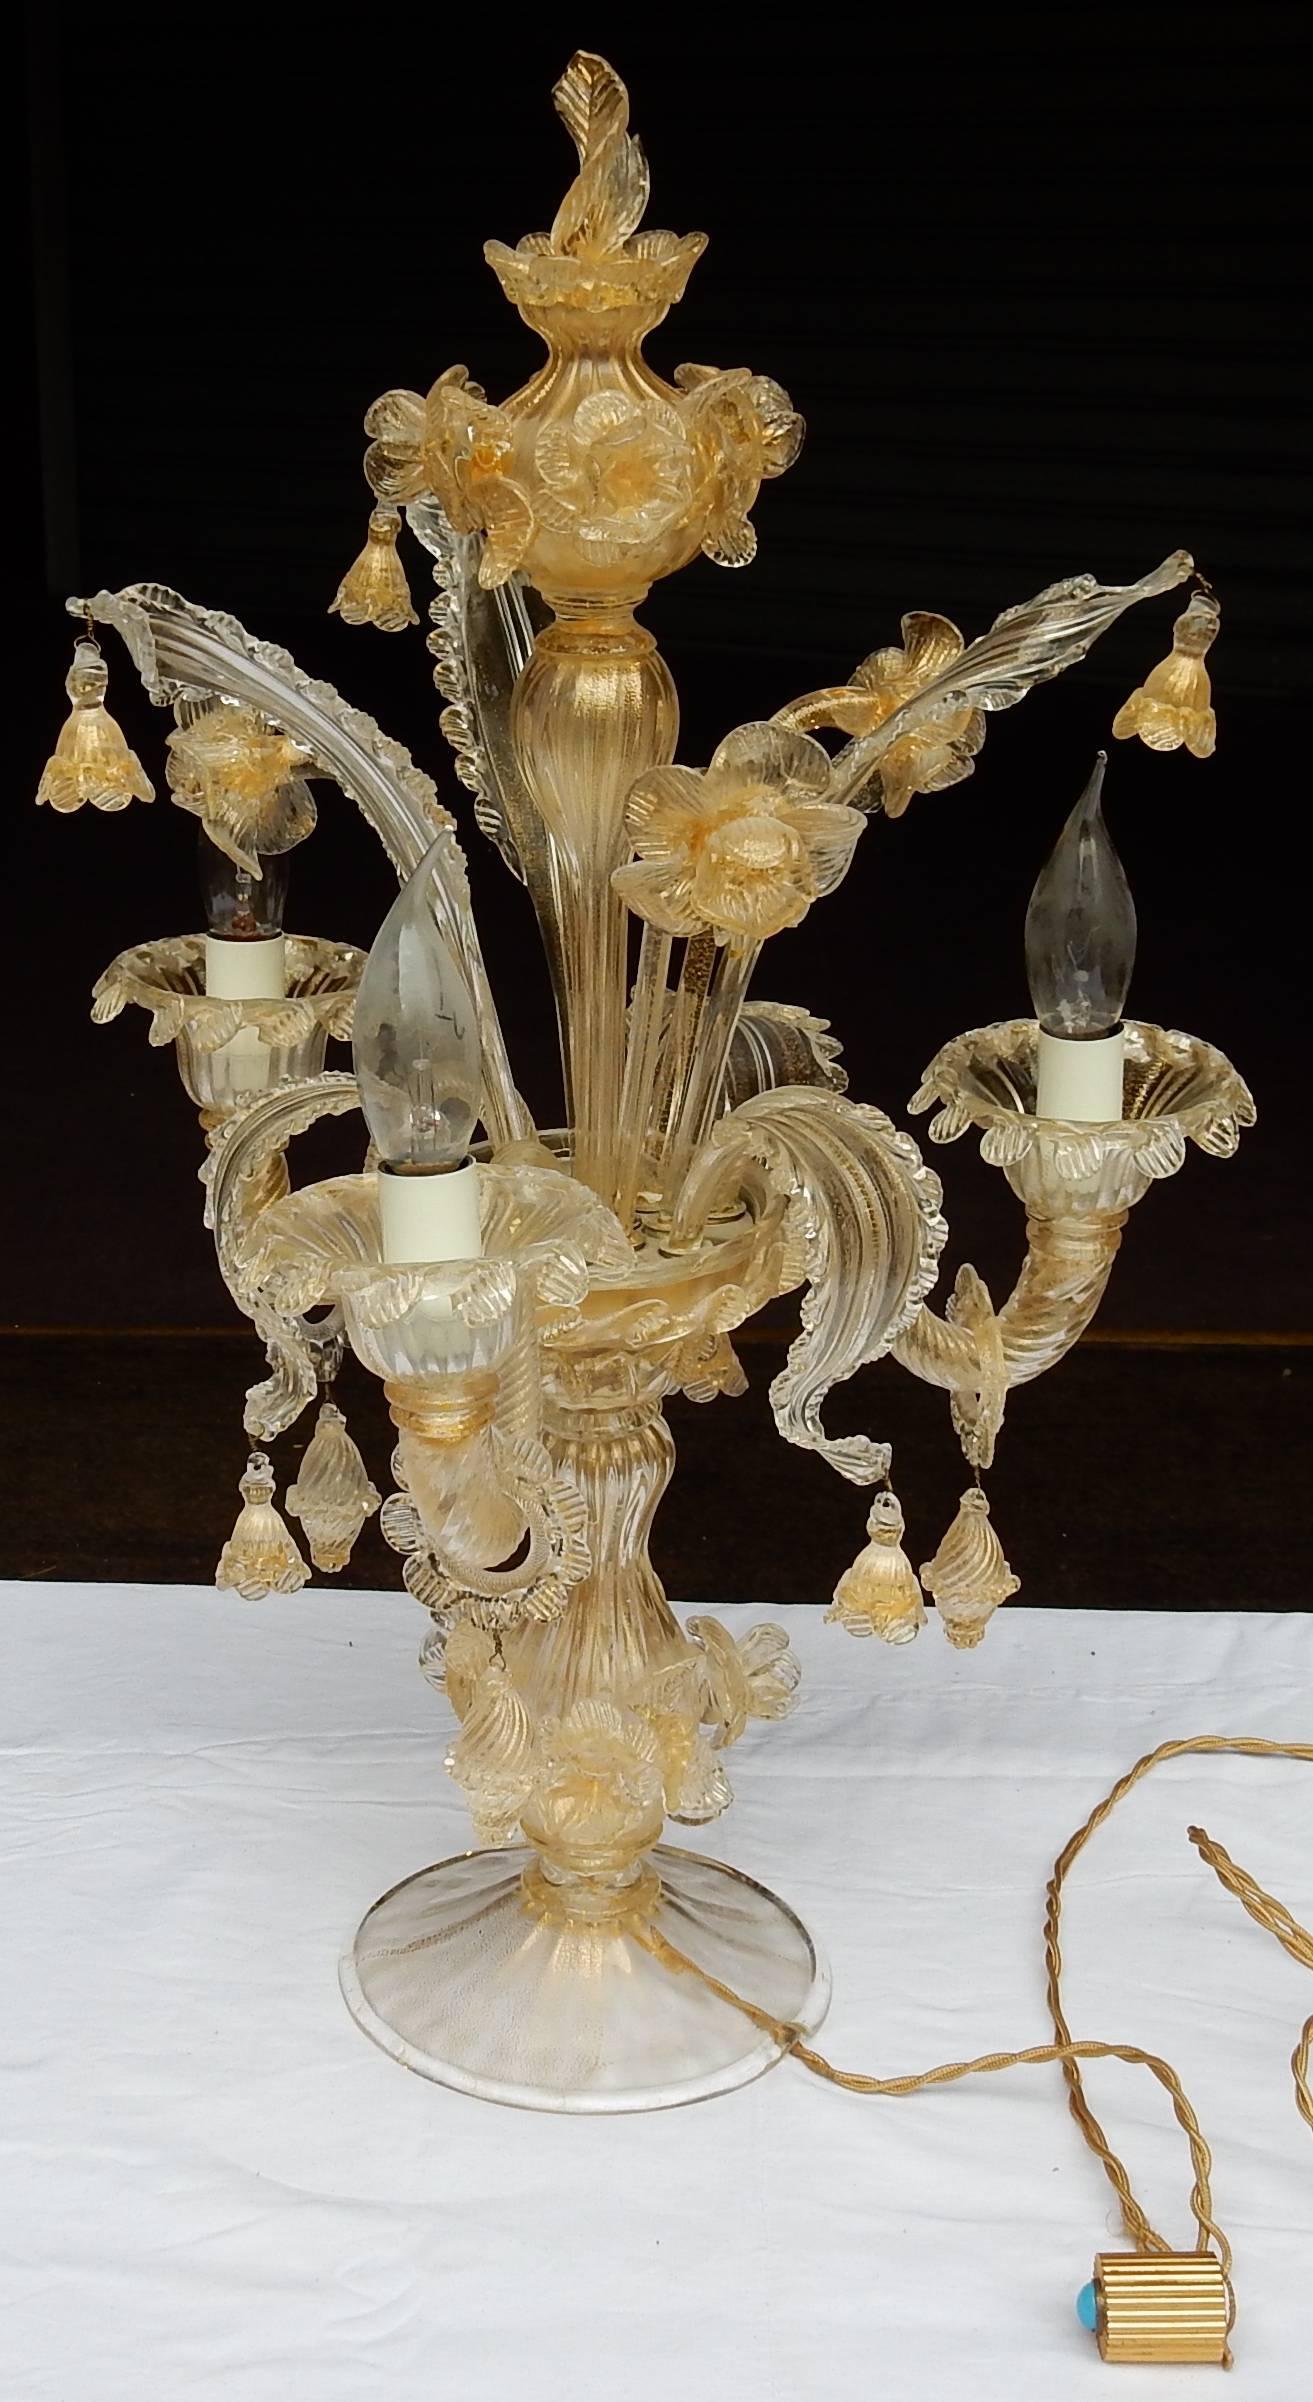 Clandestic crystal with inclusion of gold, good condition, circa on 1950-1970, three leaves up, three leaves down and three flowers up.